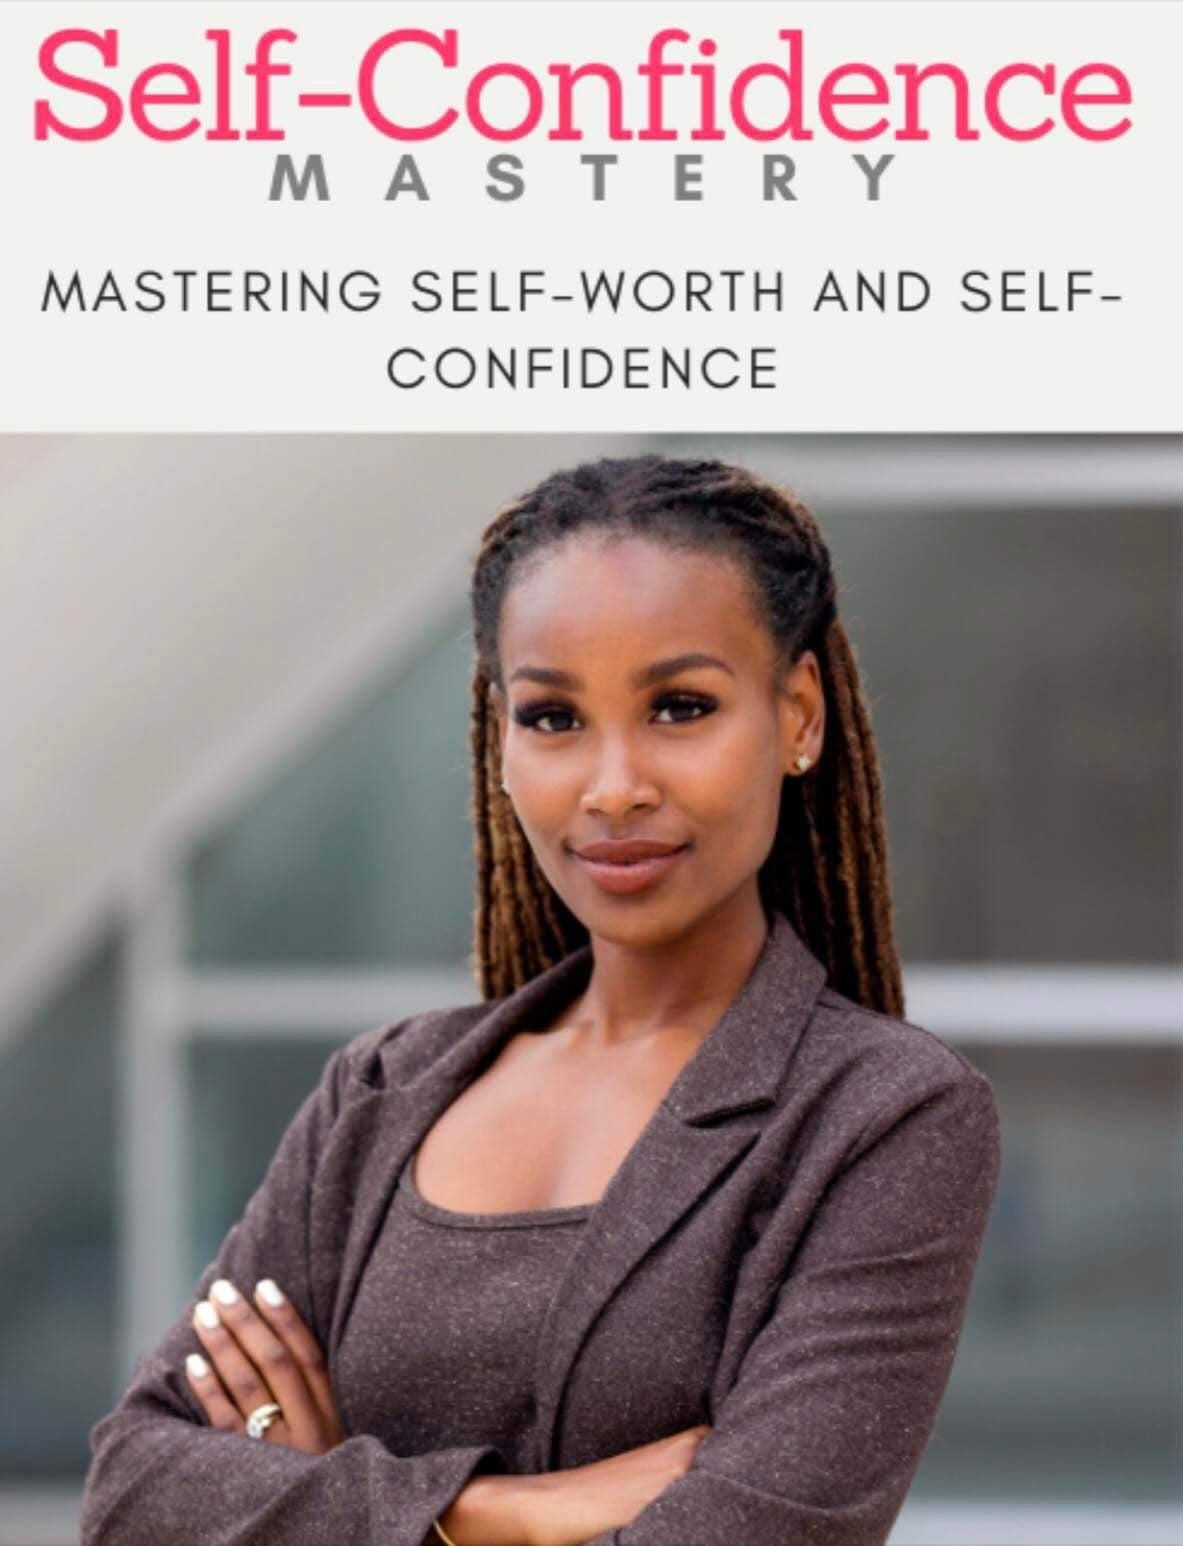 Confidently Align with your Self-worth | E-Book